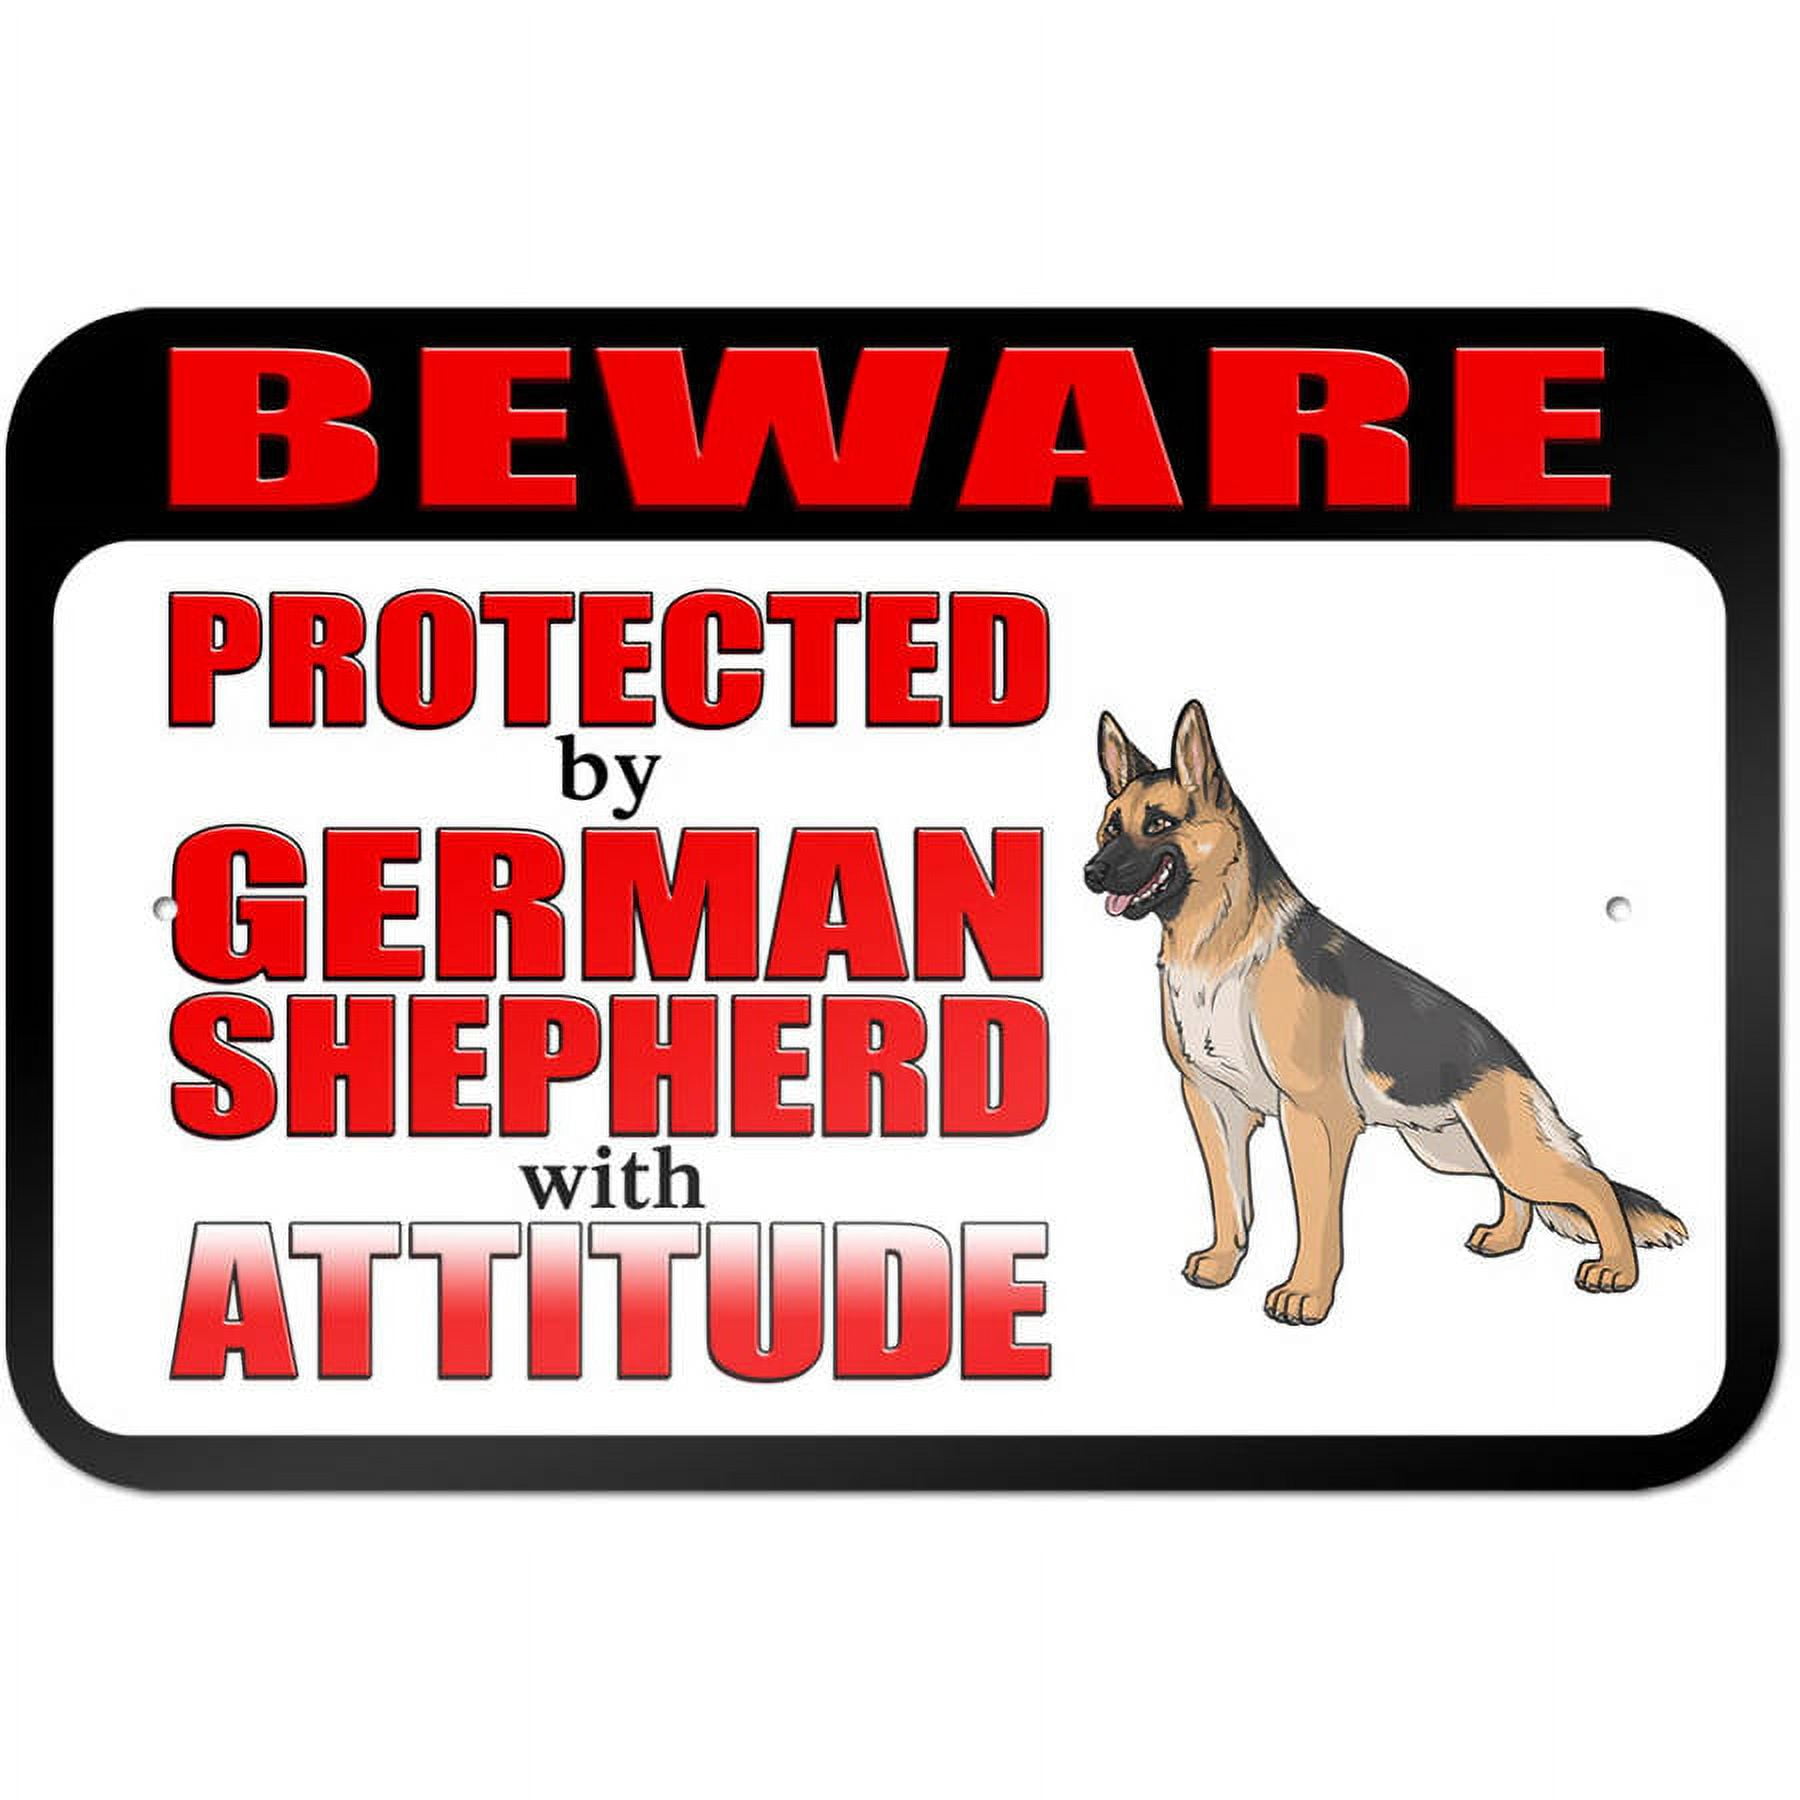 Beware Protected by German Shepherd with Attitude Sign - Walmart.com